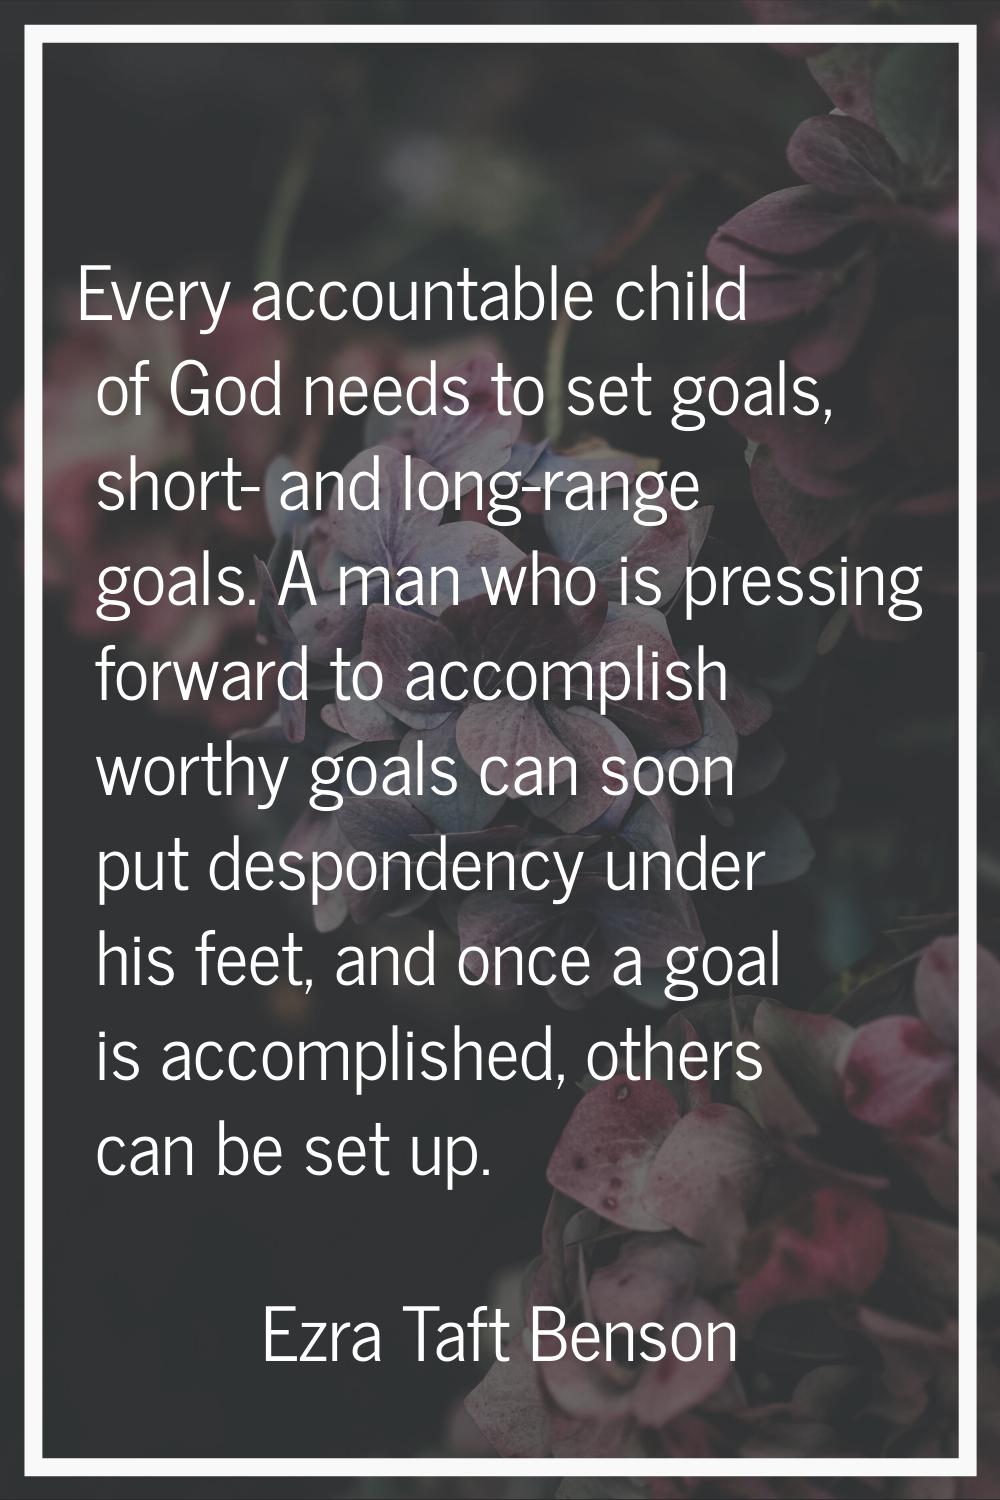 Every accountable child of God needs to set goals, short- and long-range goals. A man who is pressi